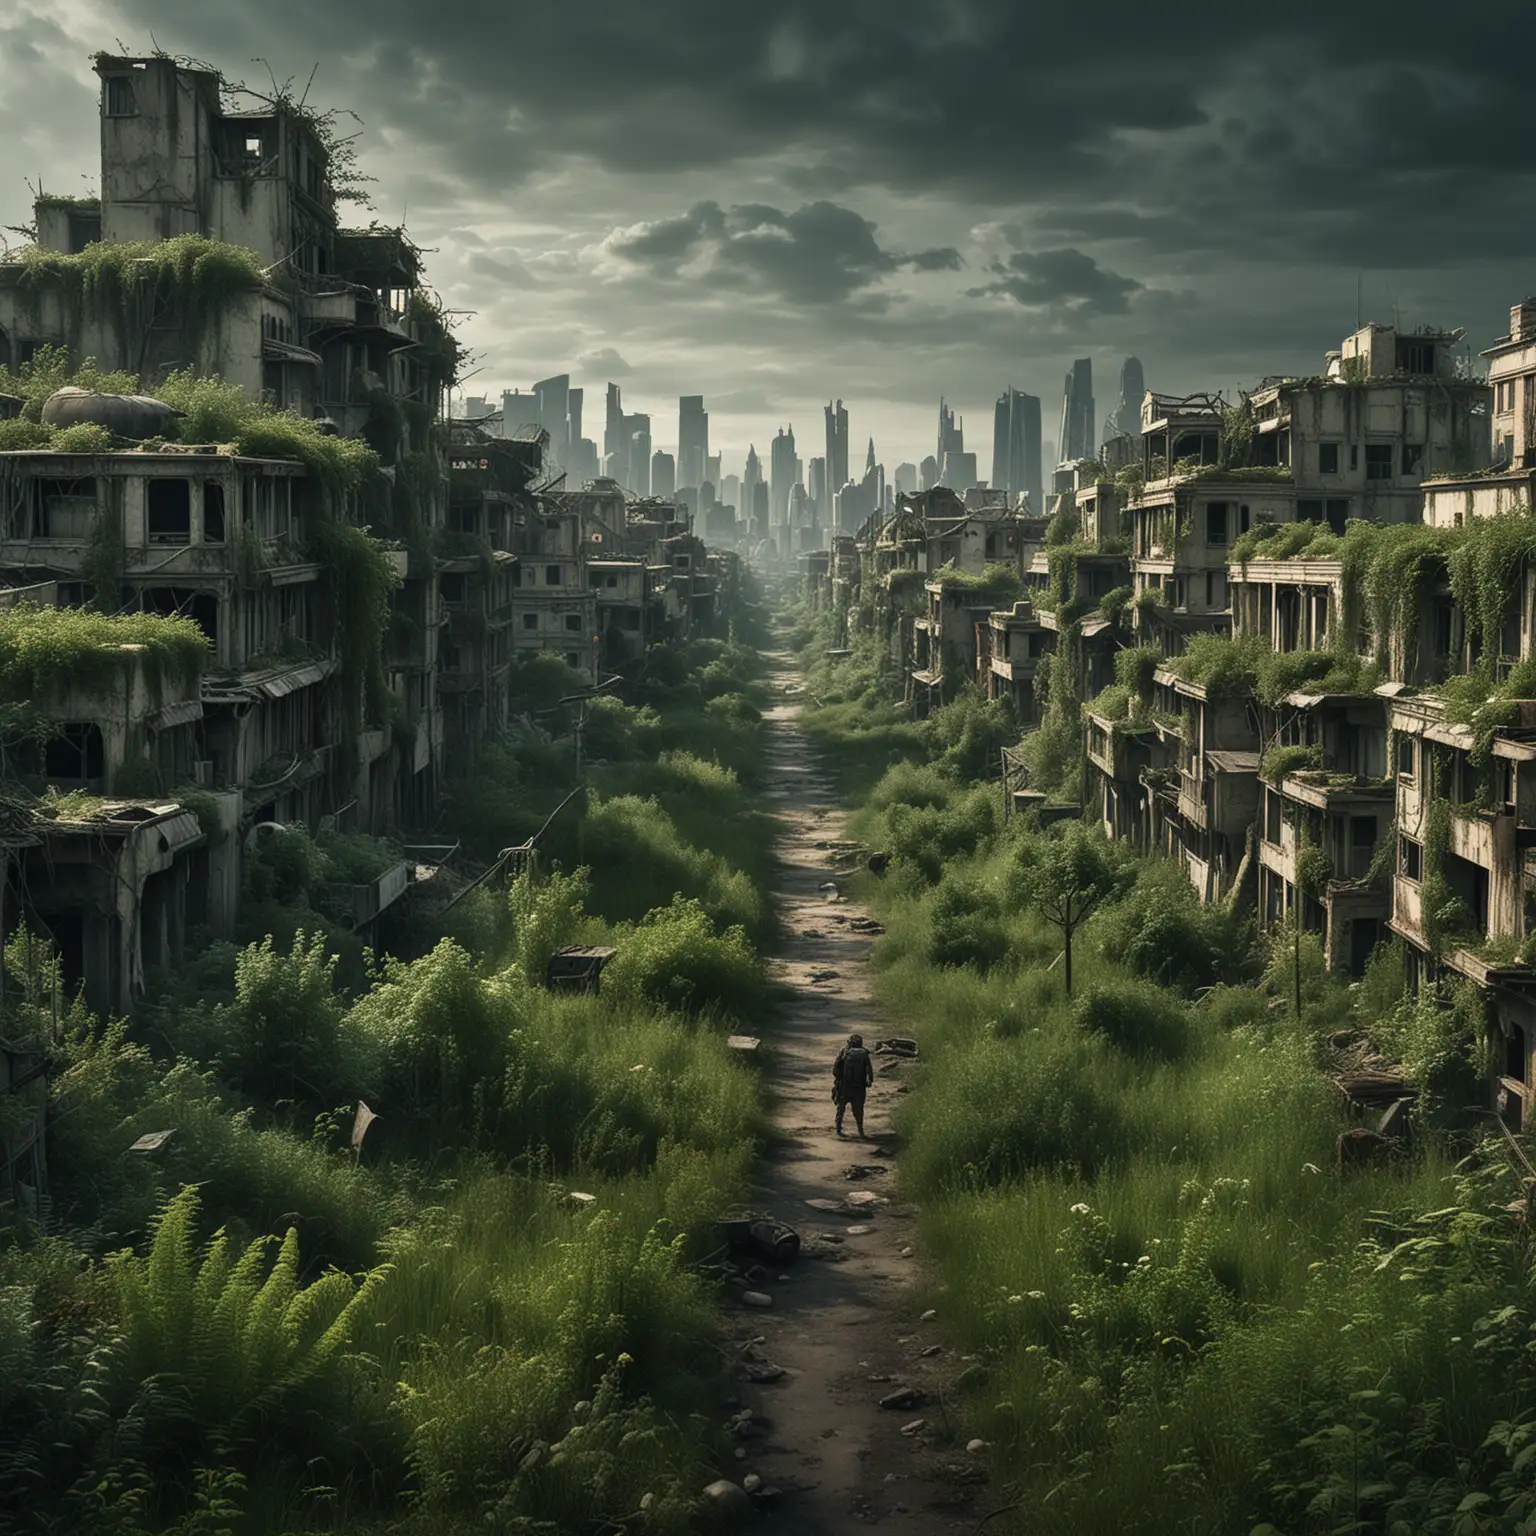 PostApocalyptic Cityscape Reclaimed by Nature